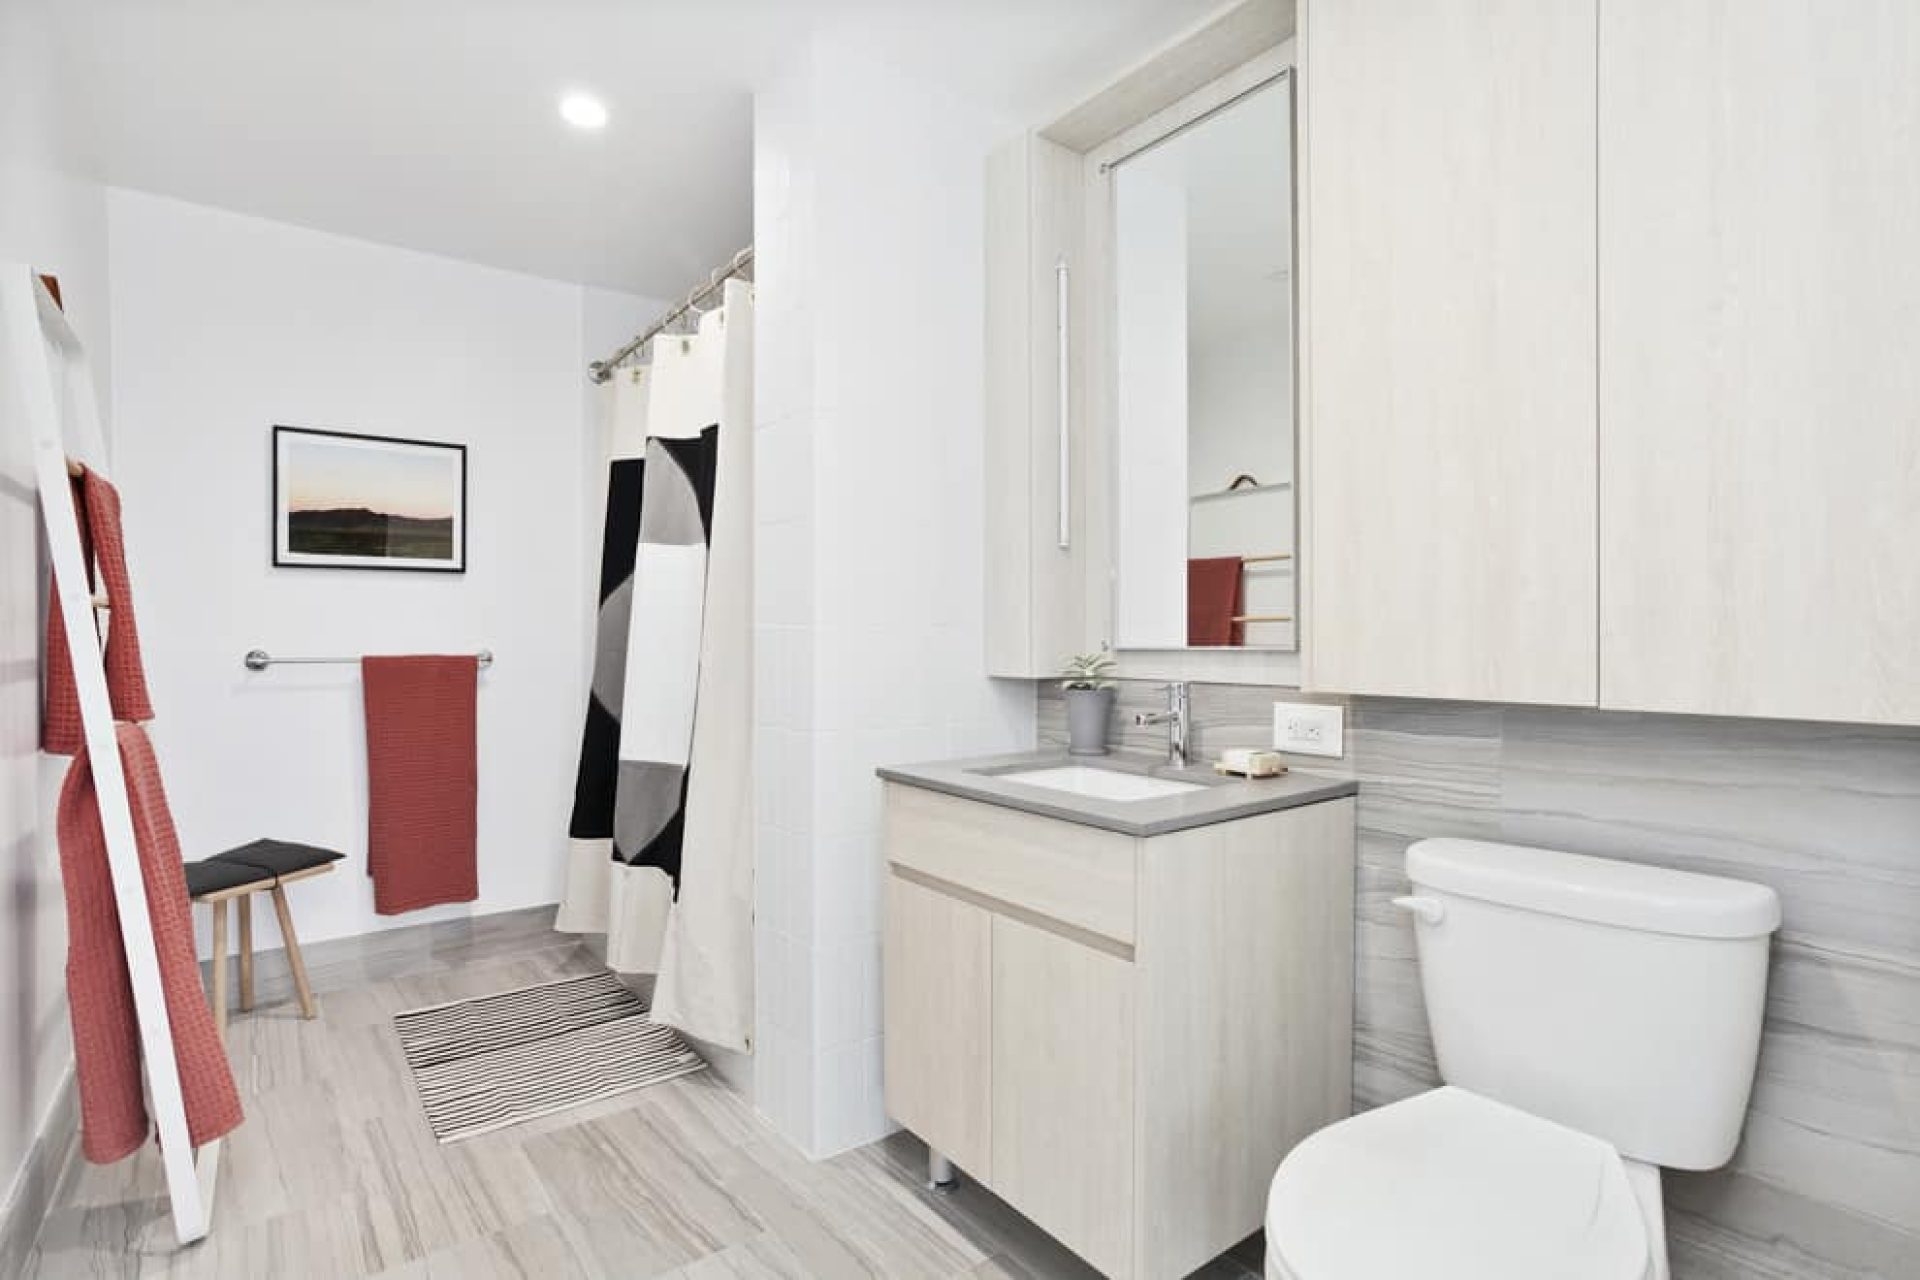 Bathroom at 66 Ainslie Street apartments with a single vanity, rectangle mirror, tile floors and soaking tub with shower.